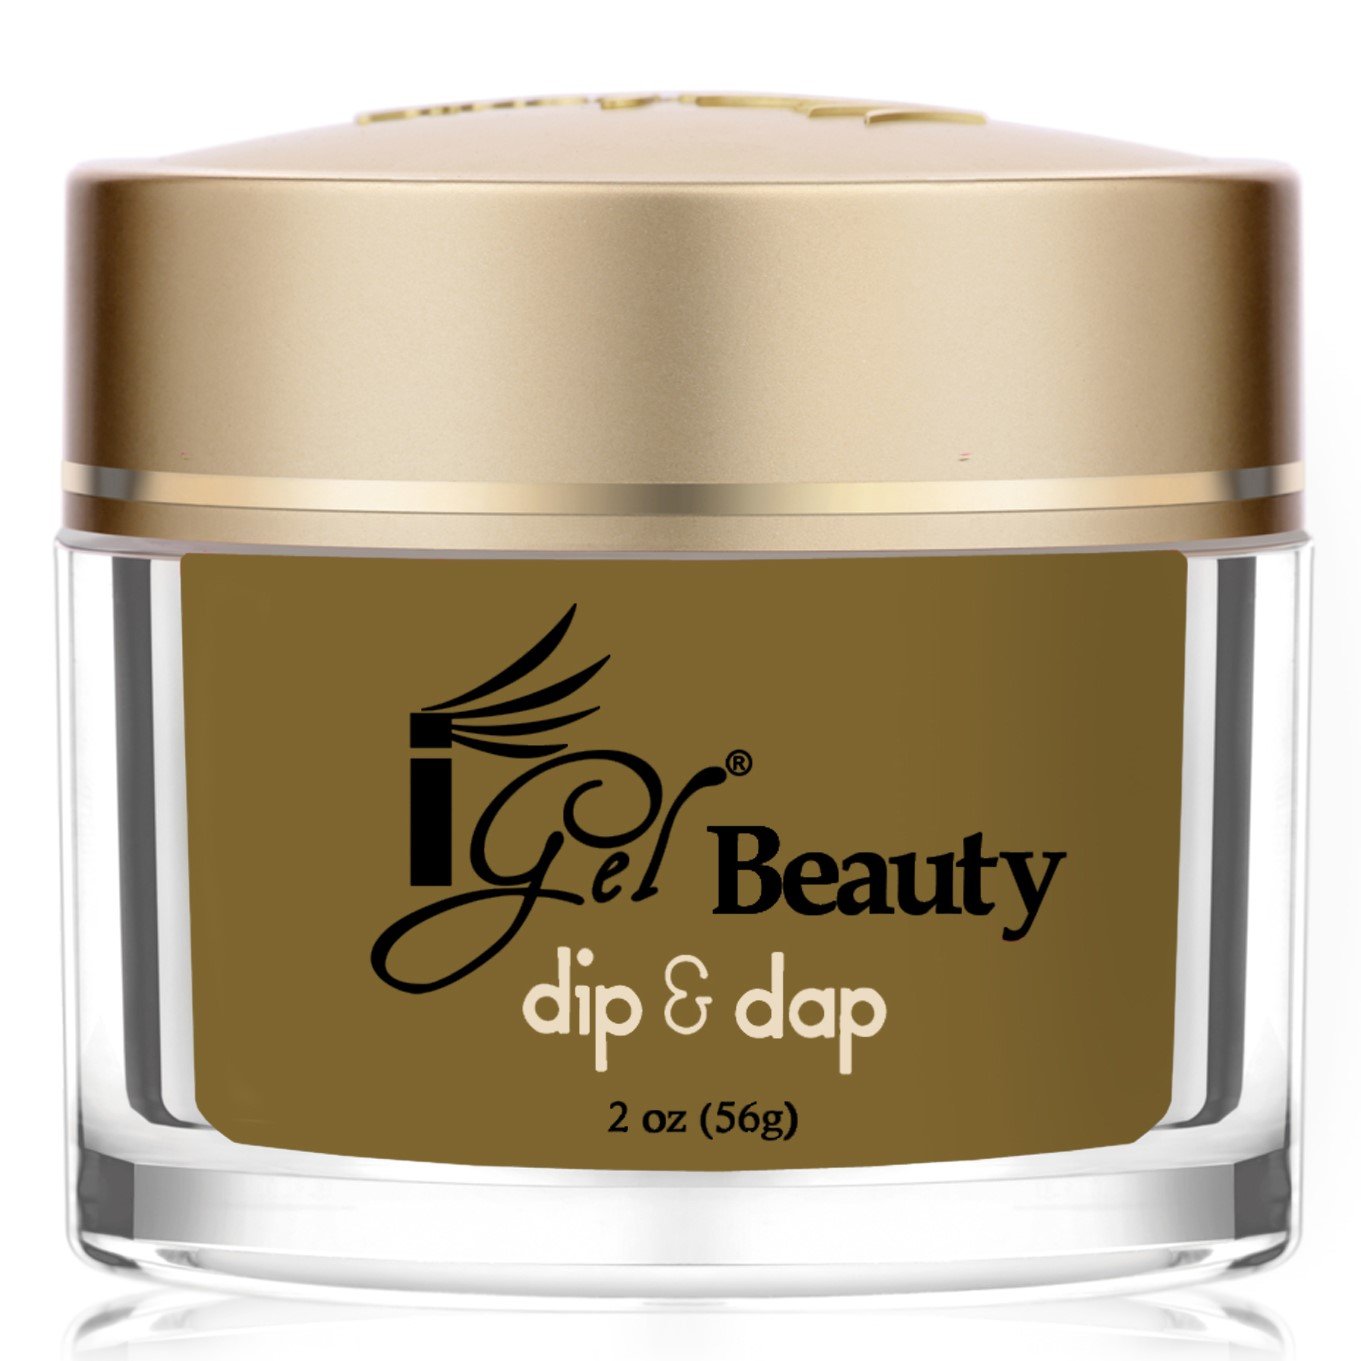 iGel Beauty - Dip & Dap Powder - DD088 Beauty Mark - RECOMMENDED FOR DIP